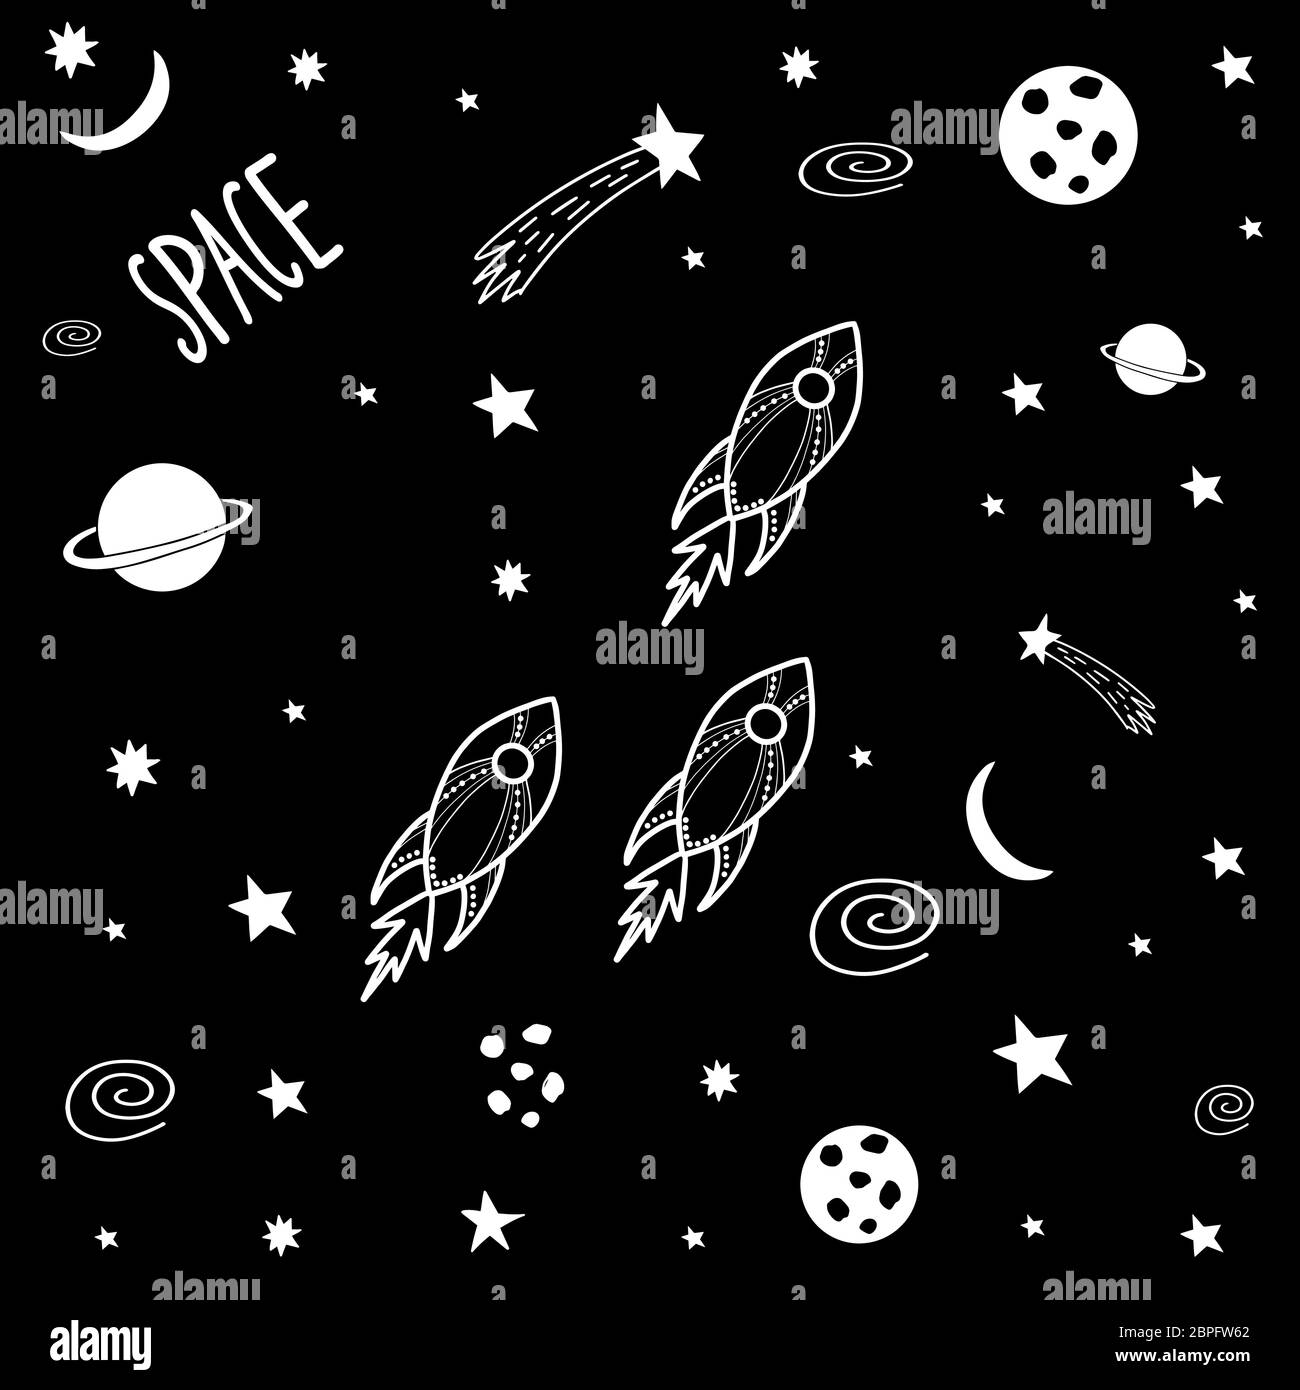 Cute cartoon doodle rockets in outer space. Galaxy pattern for prints on t-shirt, fabric, paper. Vector stock illustration. Stock Vector